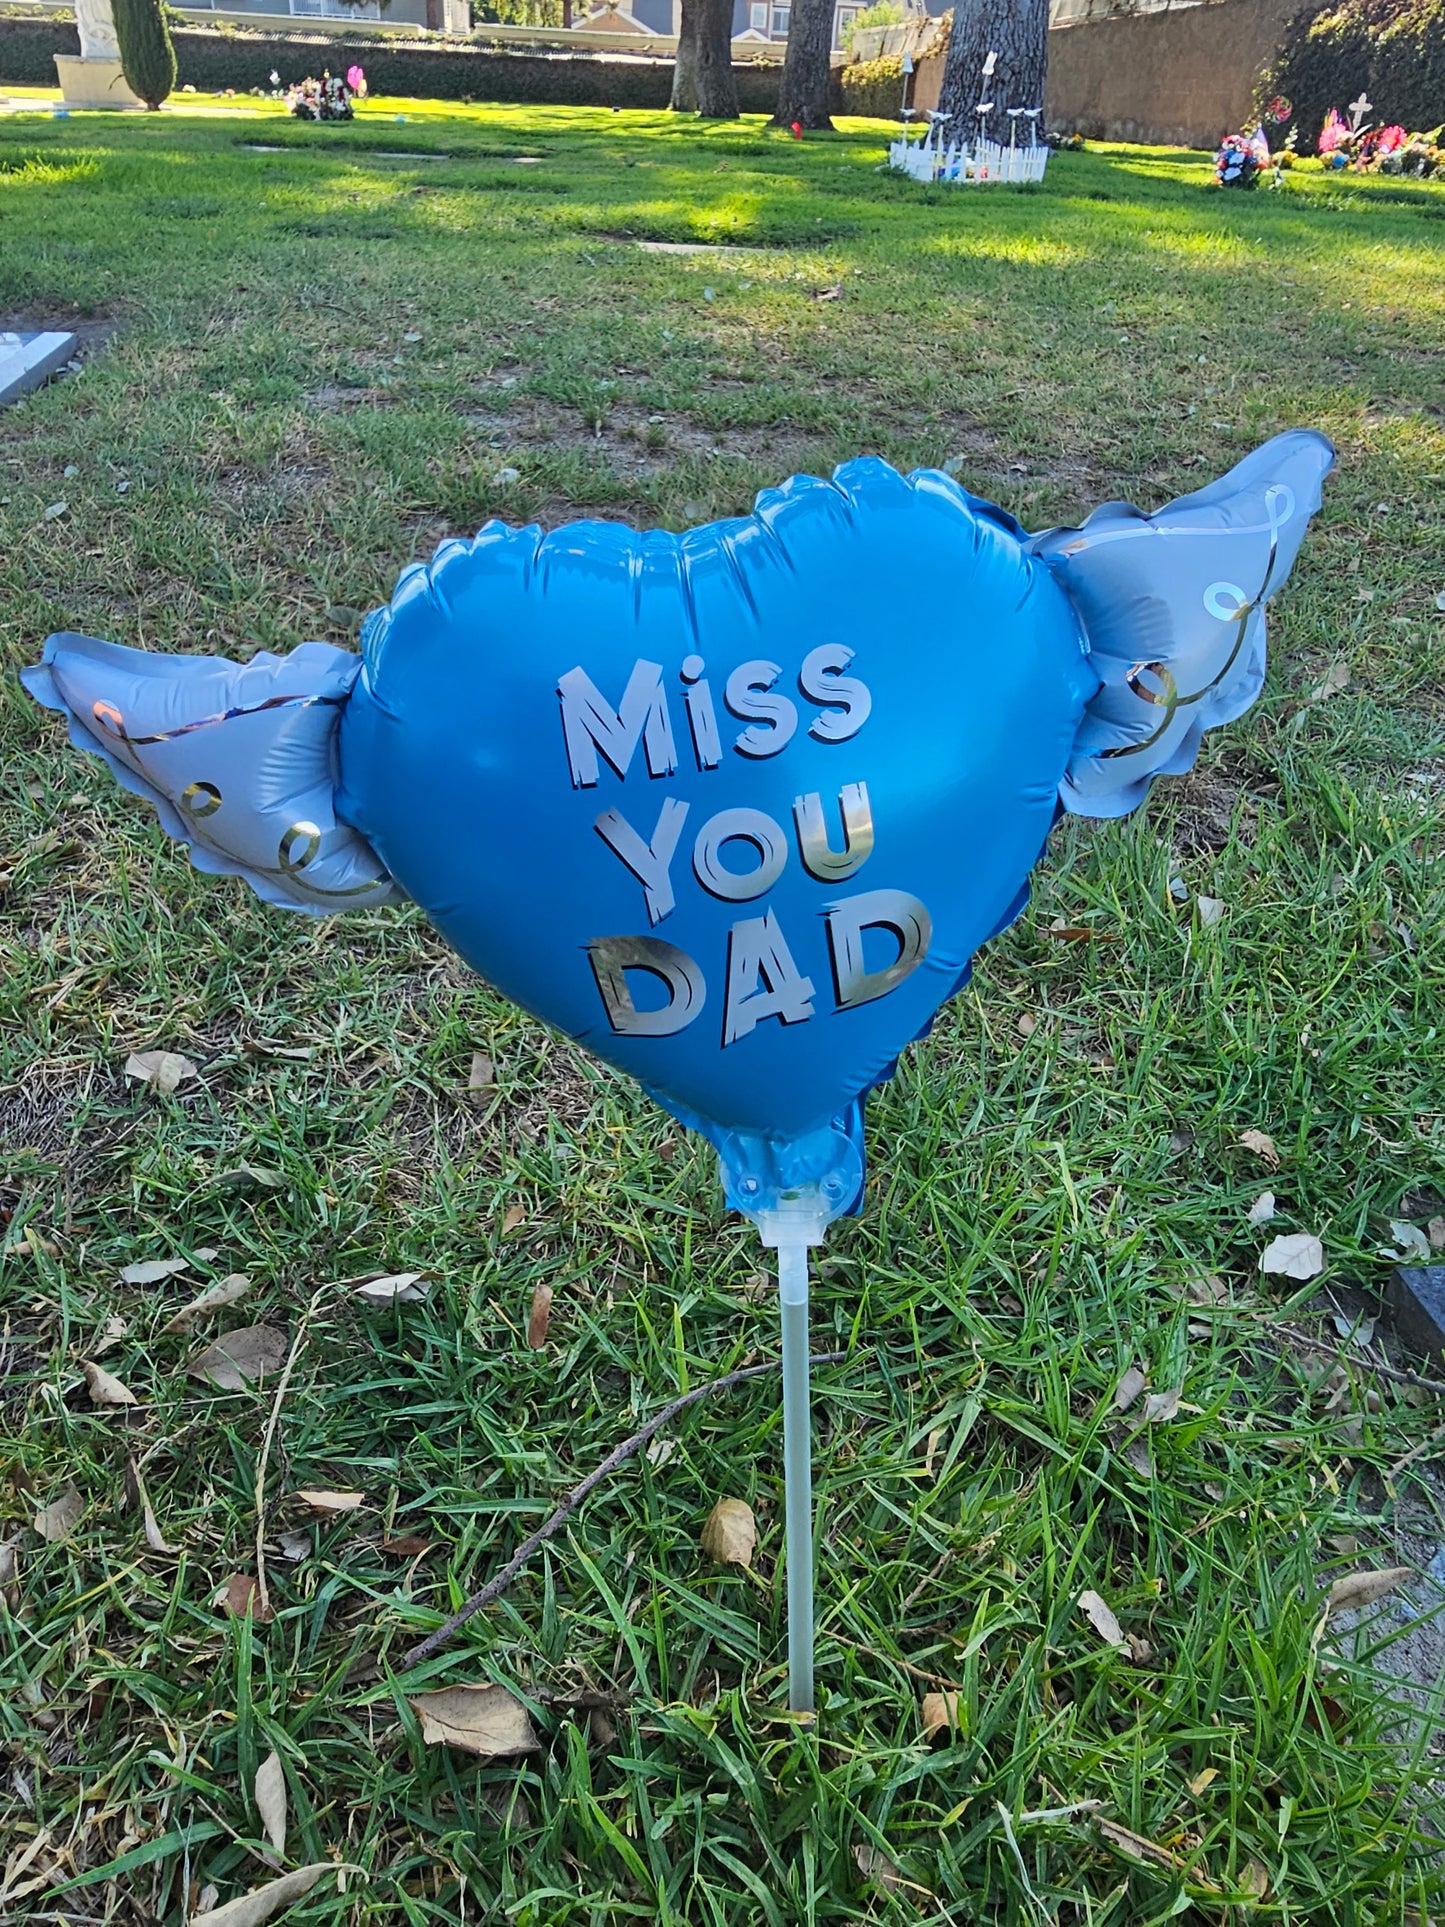 Heavenly Balloons ® on a Stick Miss You Dad (blue) balloon heart-shaped with angel wings dimensions